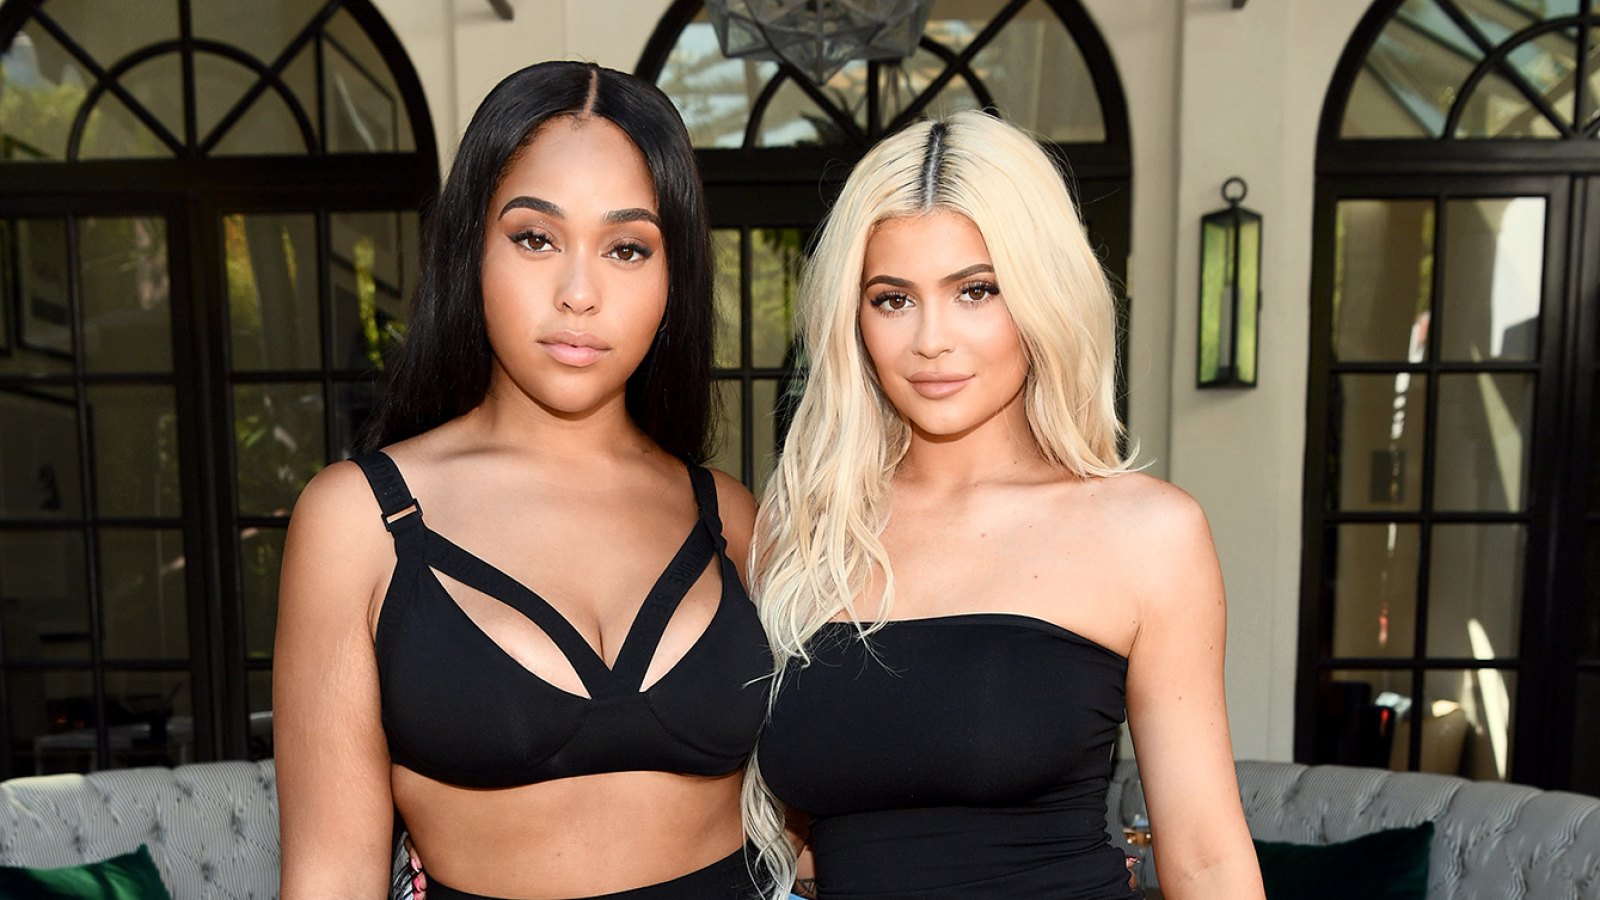 Jordyn Woods Shows Off Her Killer Style In Latest IG Photo